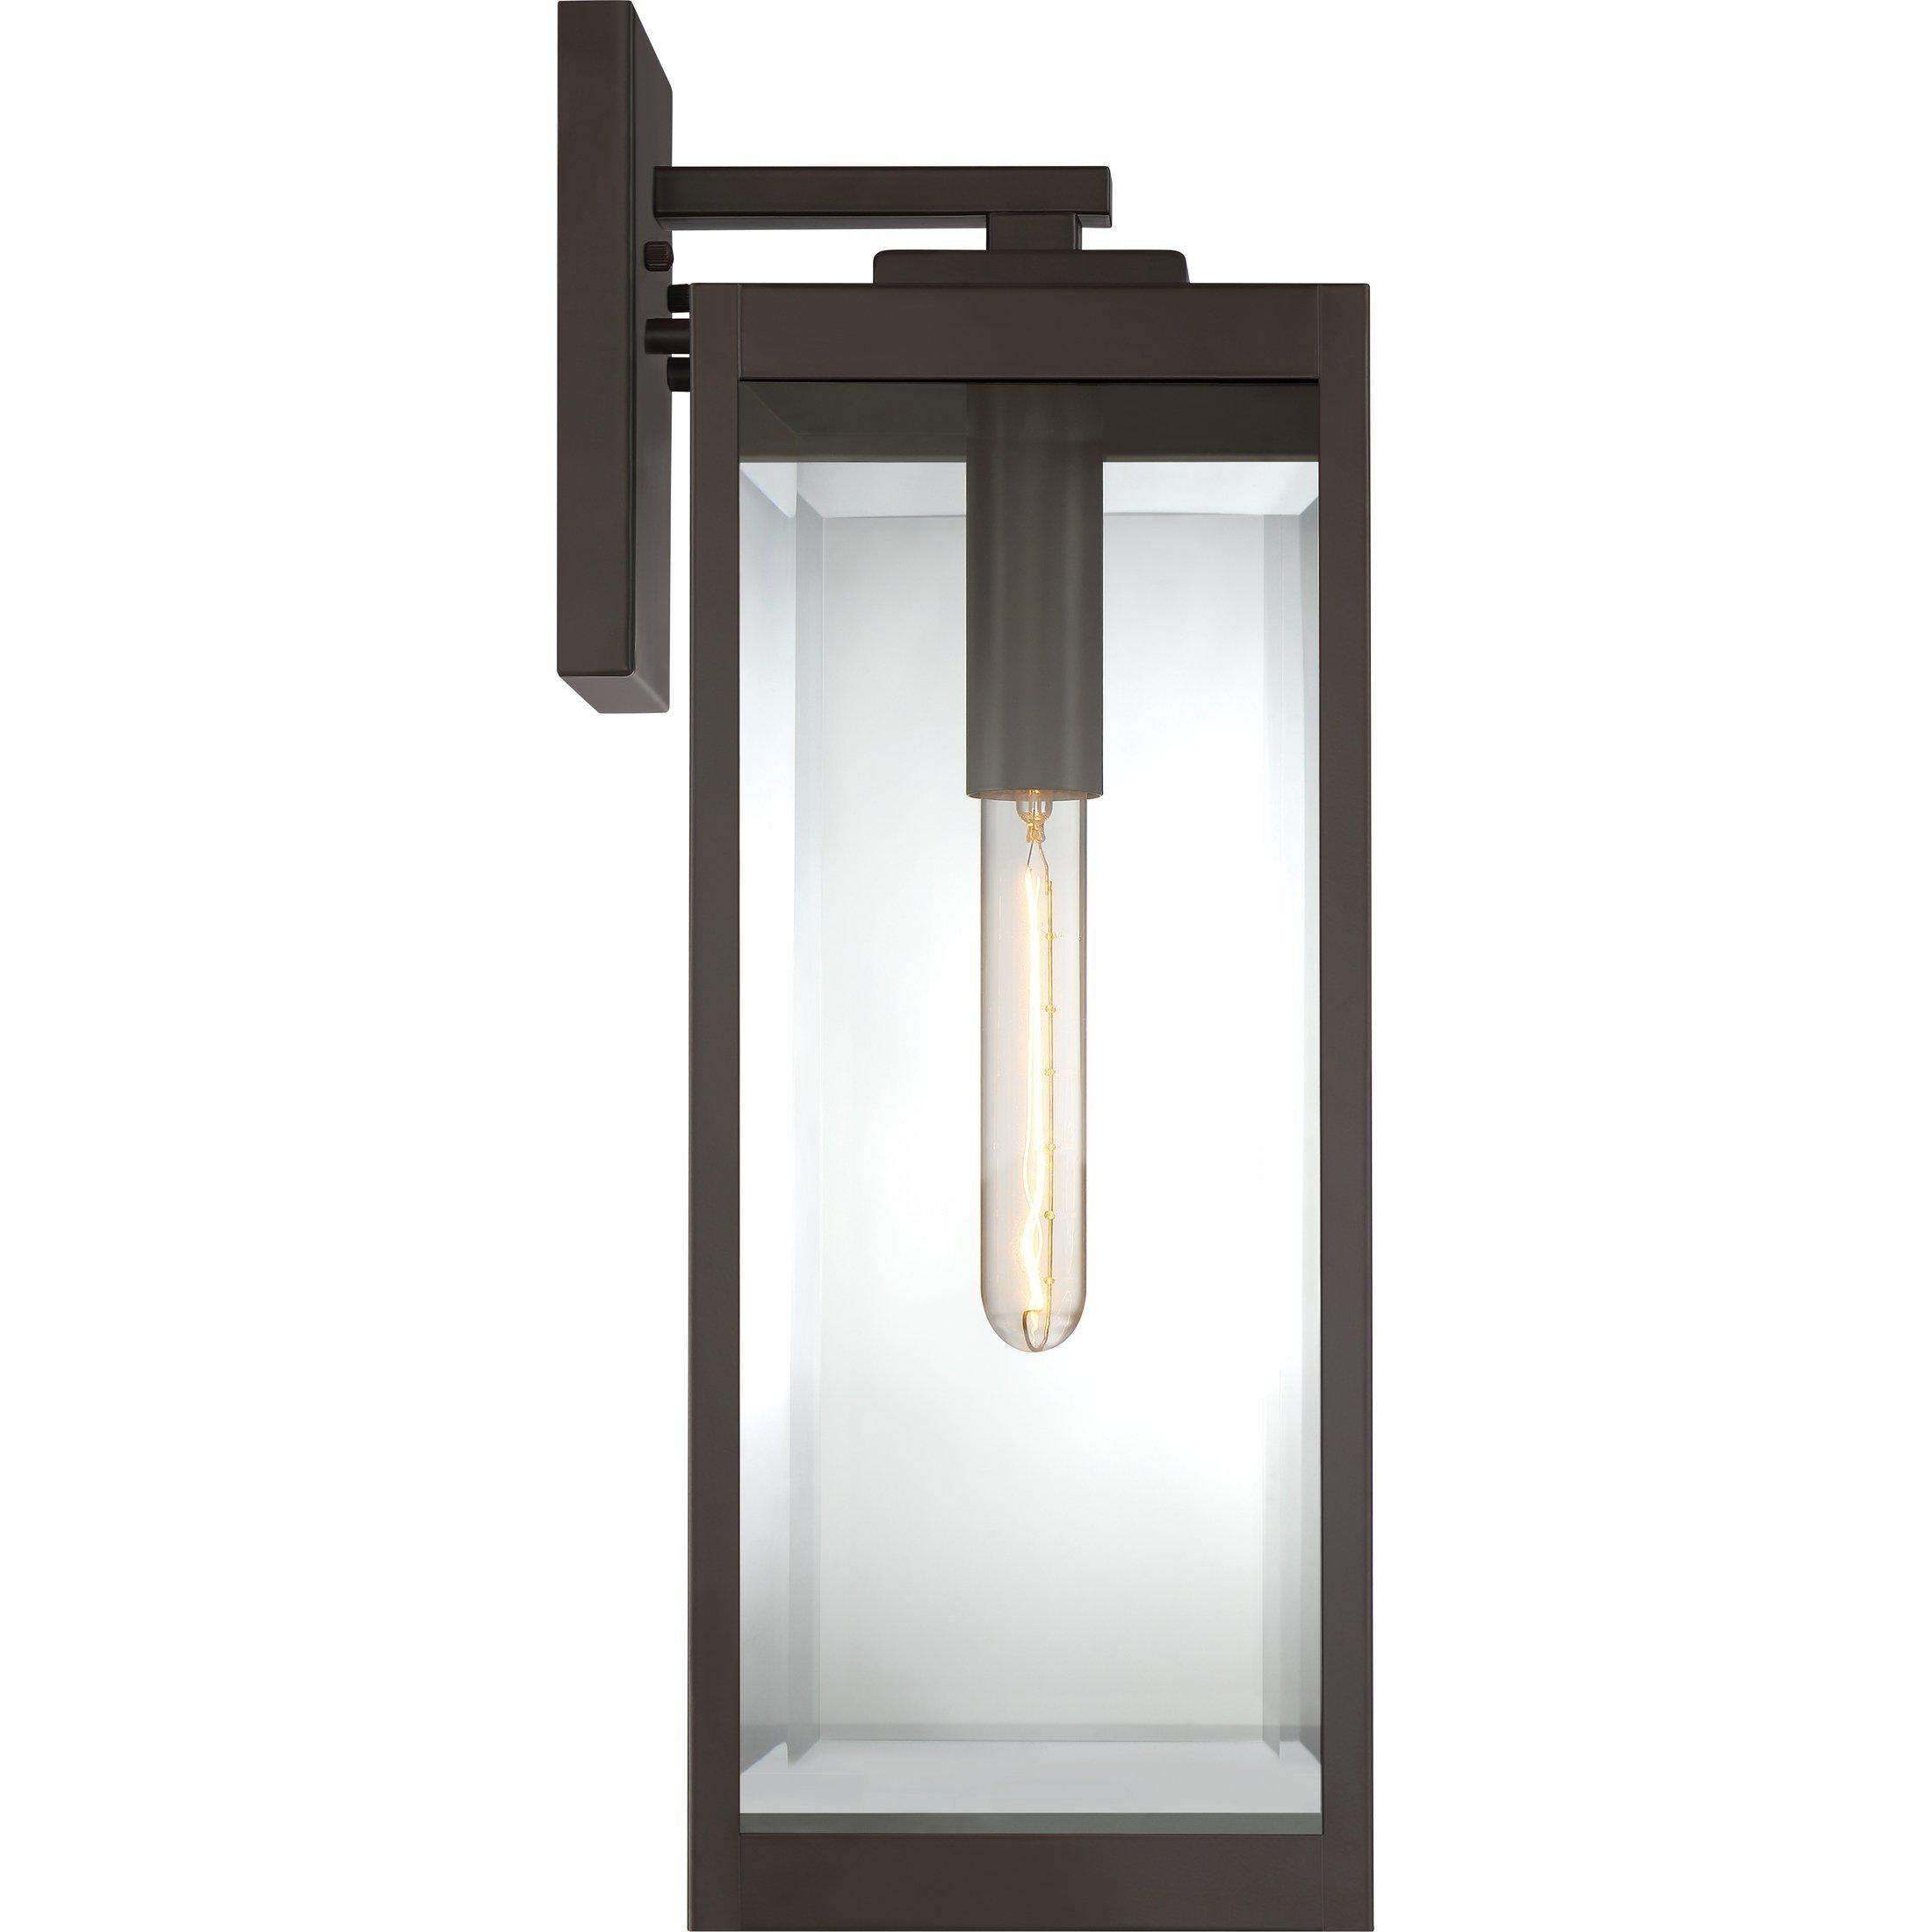 Quoizel Westover Outdoor Lantern, Large | Overstock Outdoor l Wall Quoizel Inc   